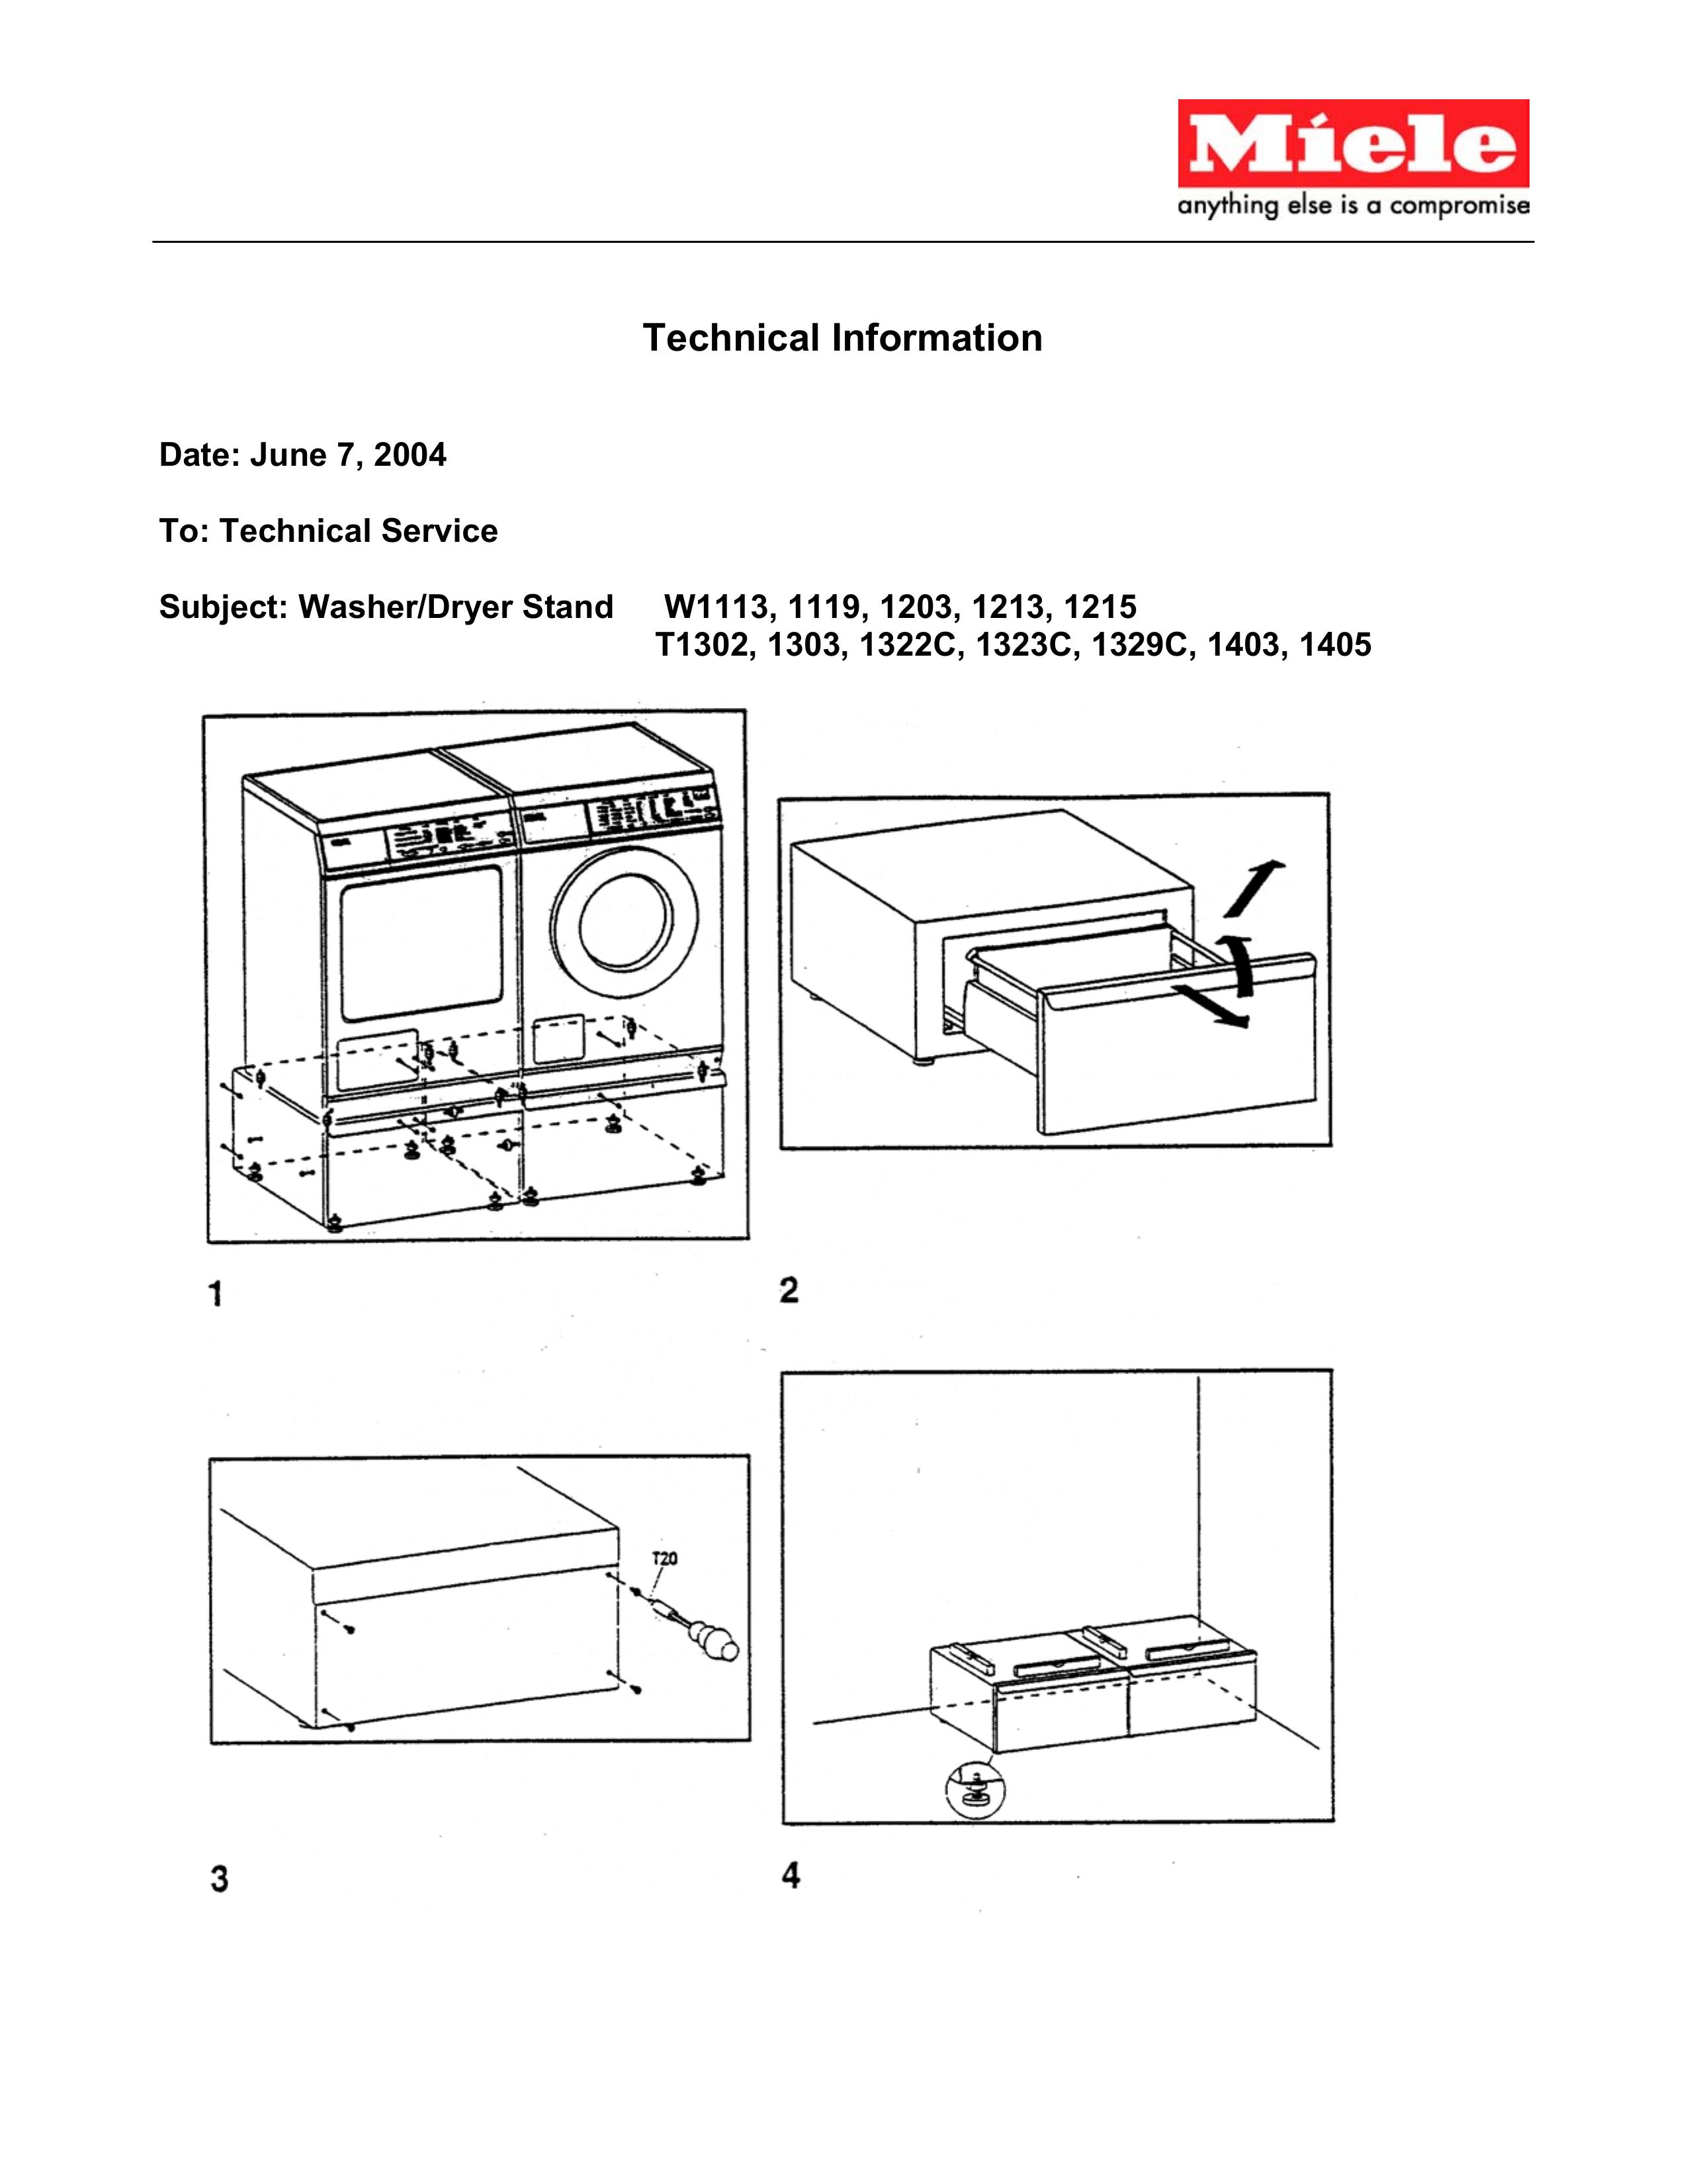 Miele W1203 Washer Accessories User Manual